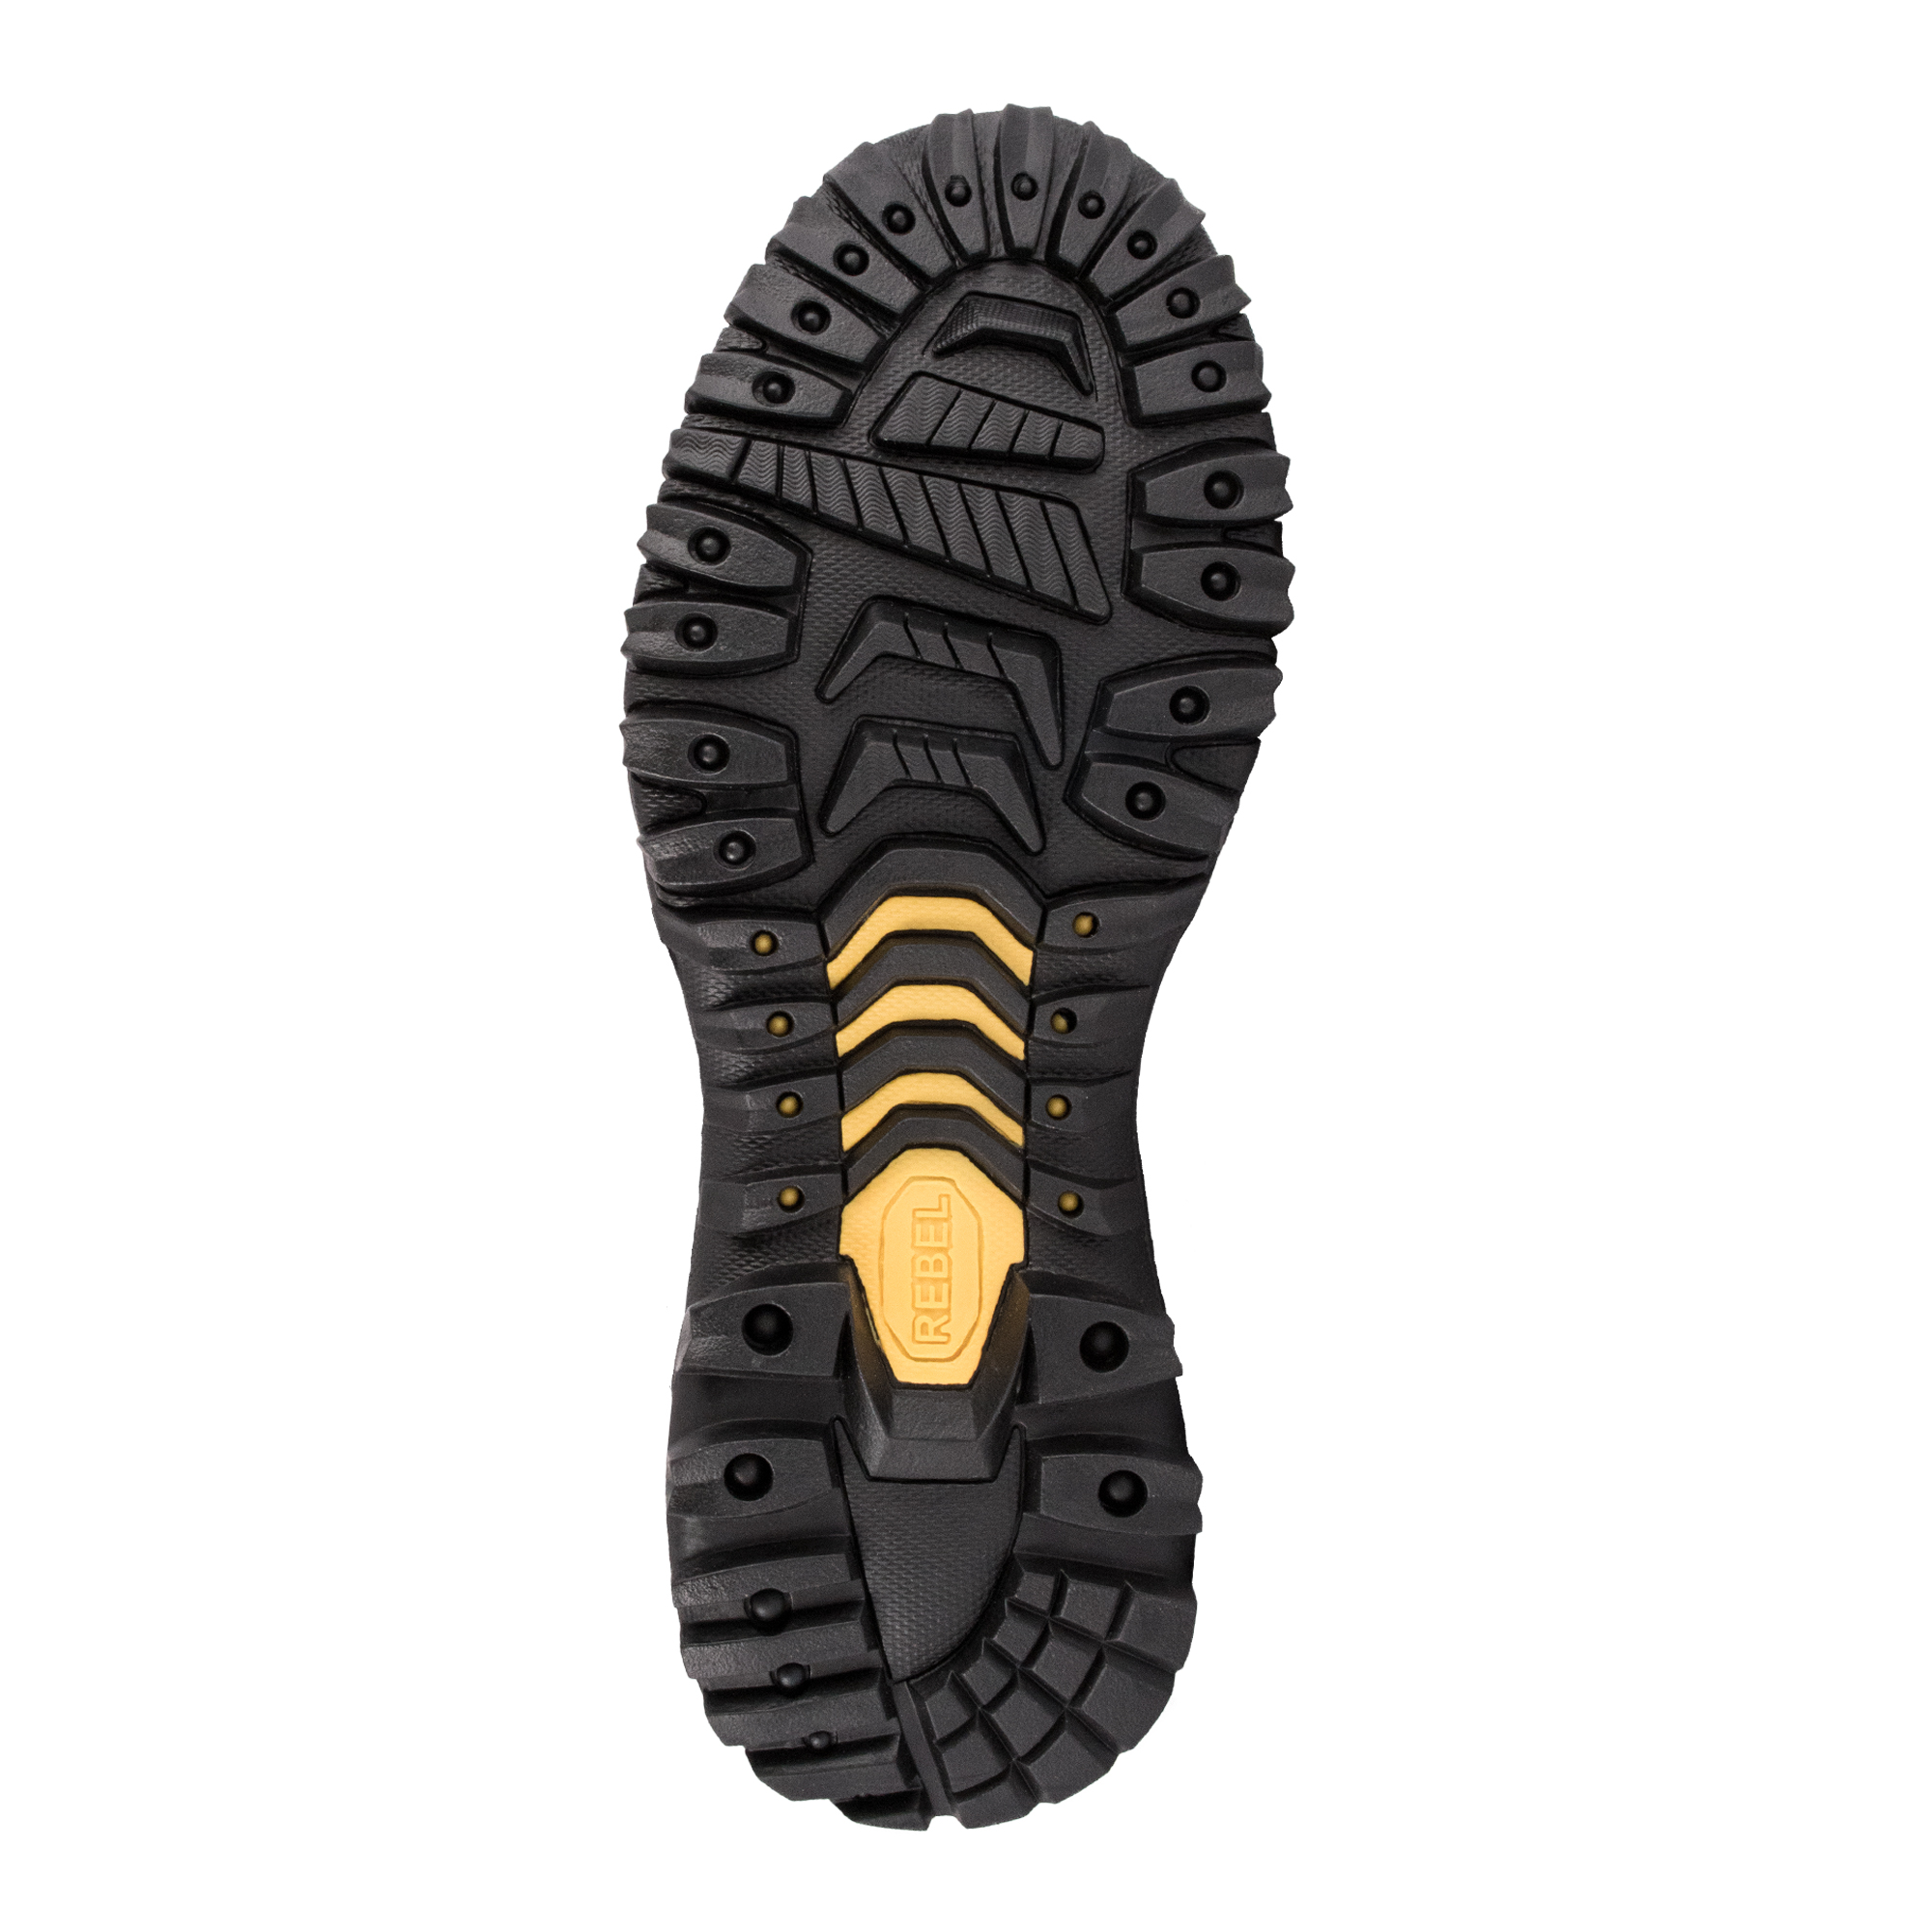 Expedition Safety Shoe - REBEL Safety Gear